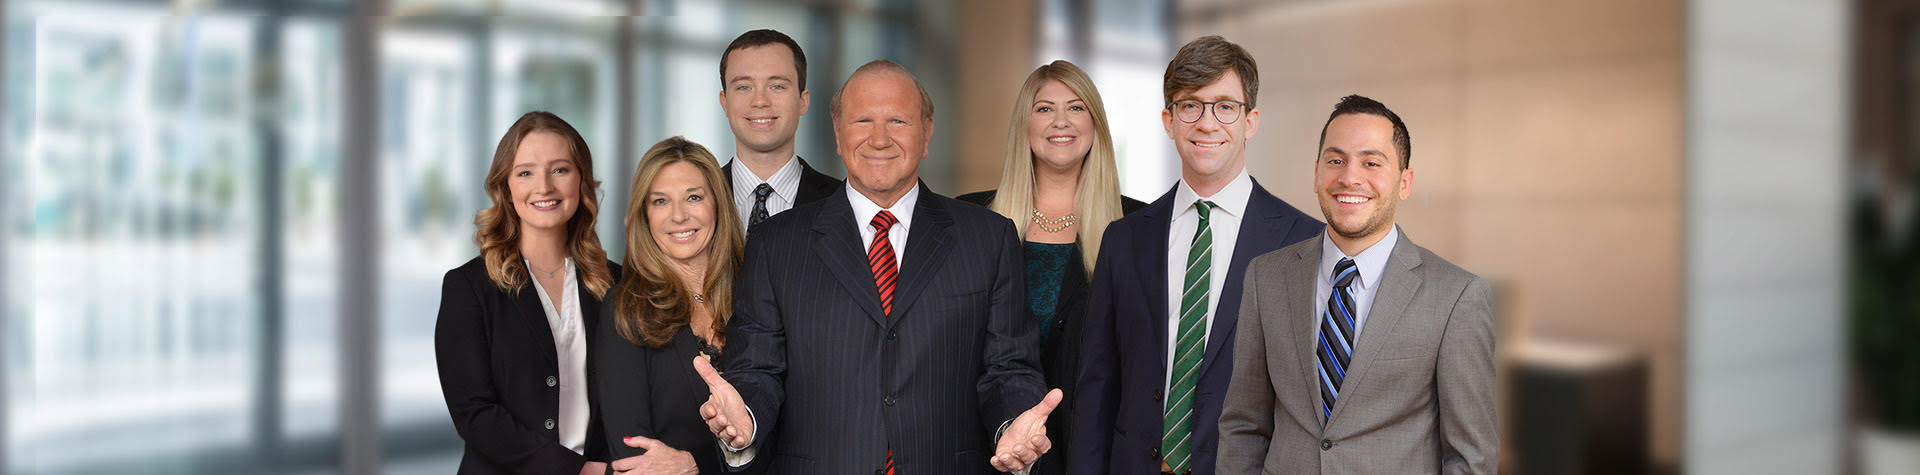 Sid Gold Attorneys - Group photo